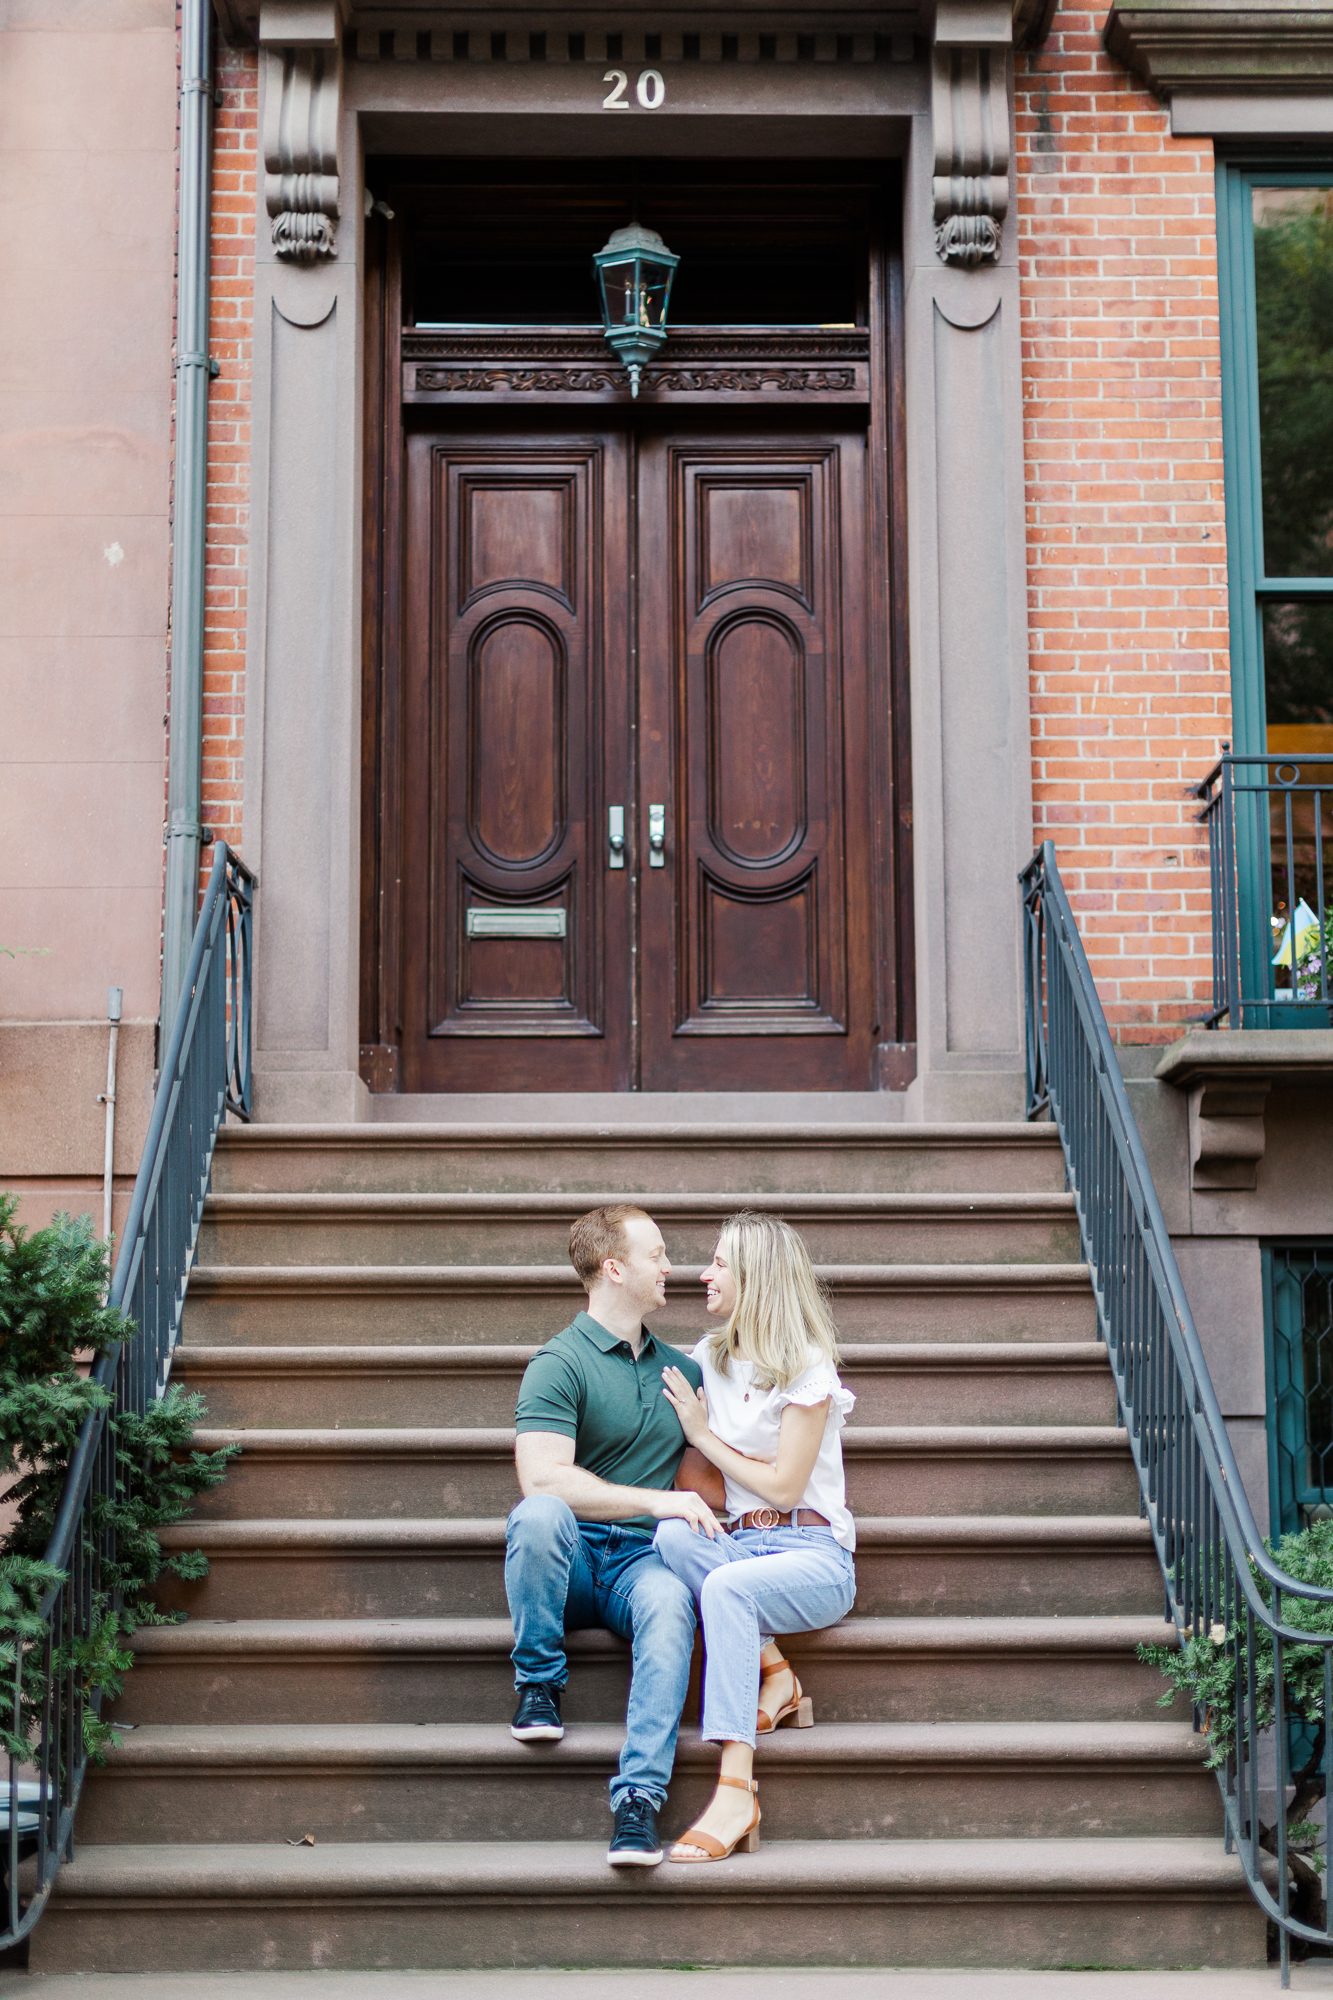 Fun Engagement Photos In Brooklyn Heights